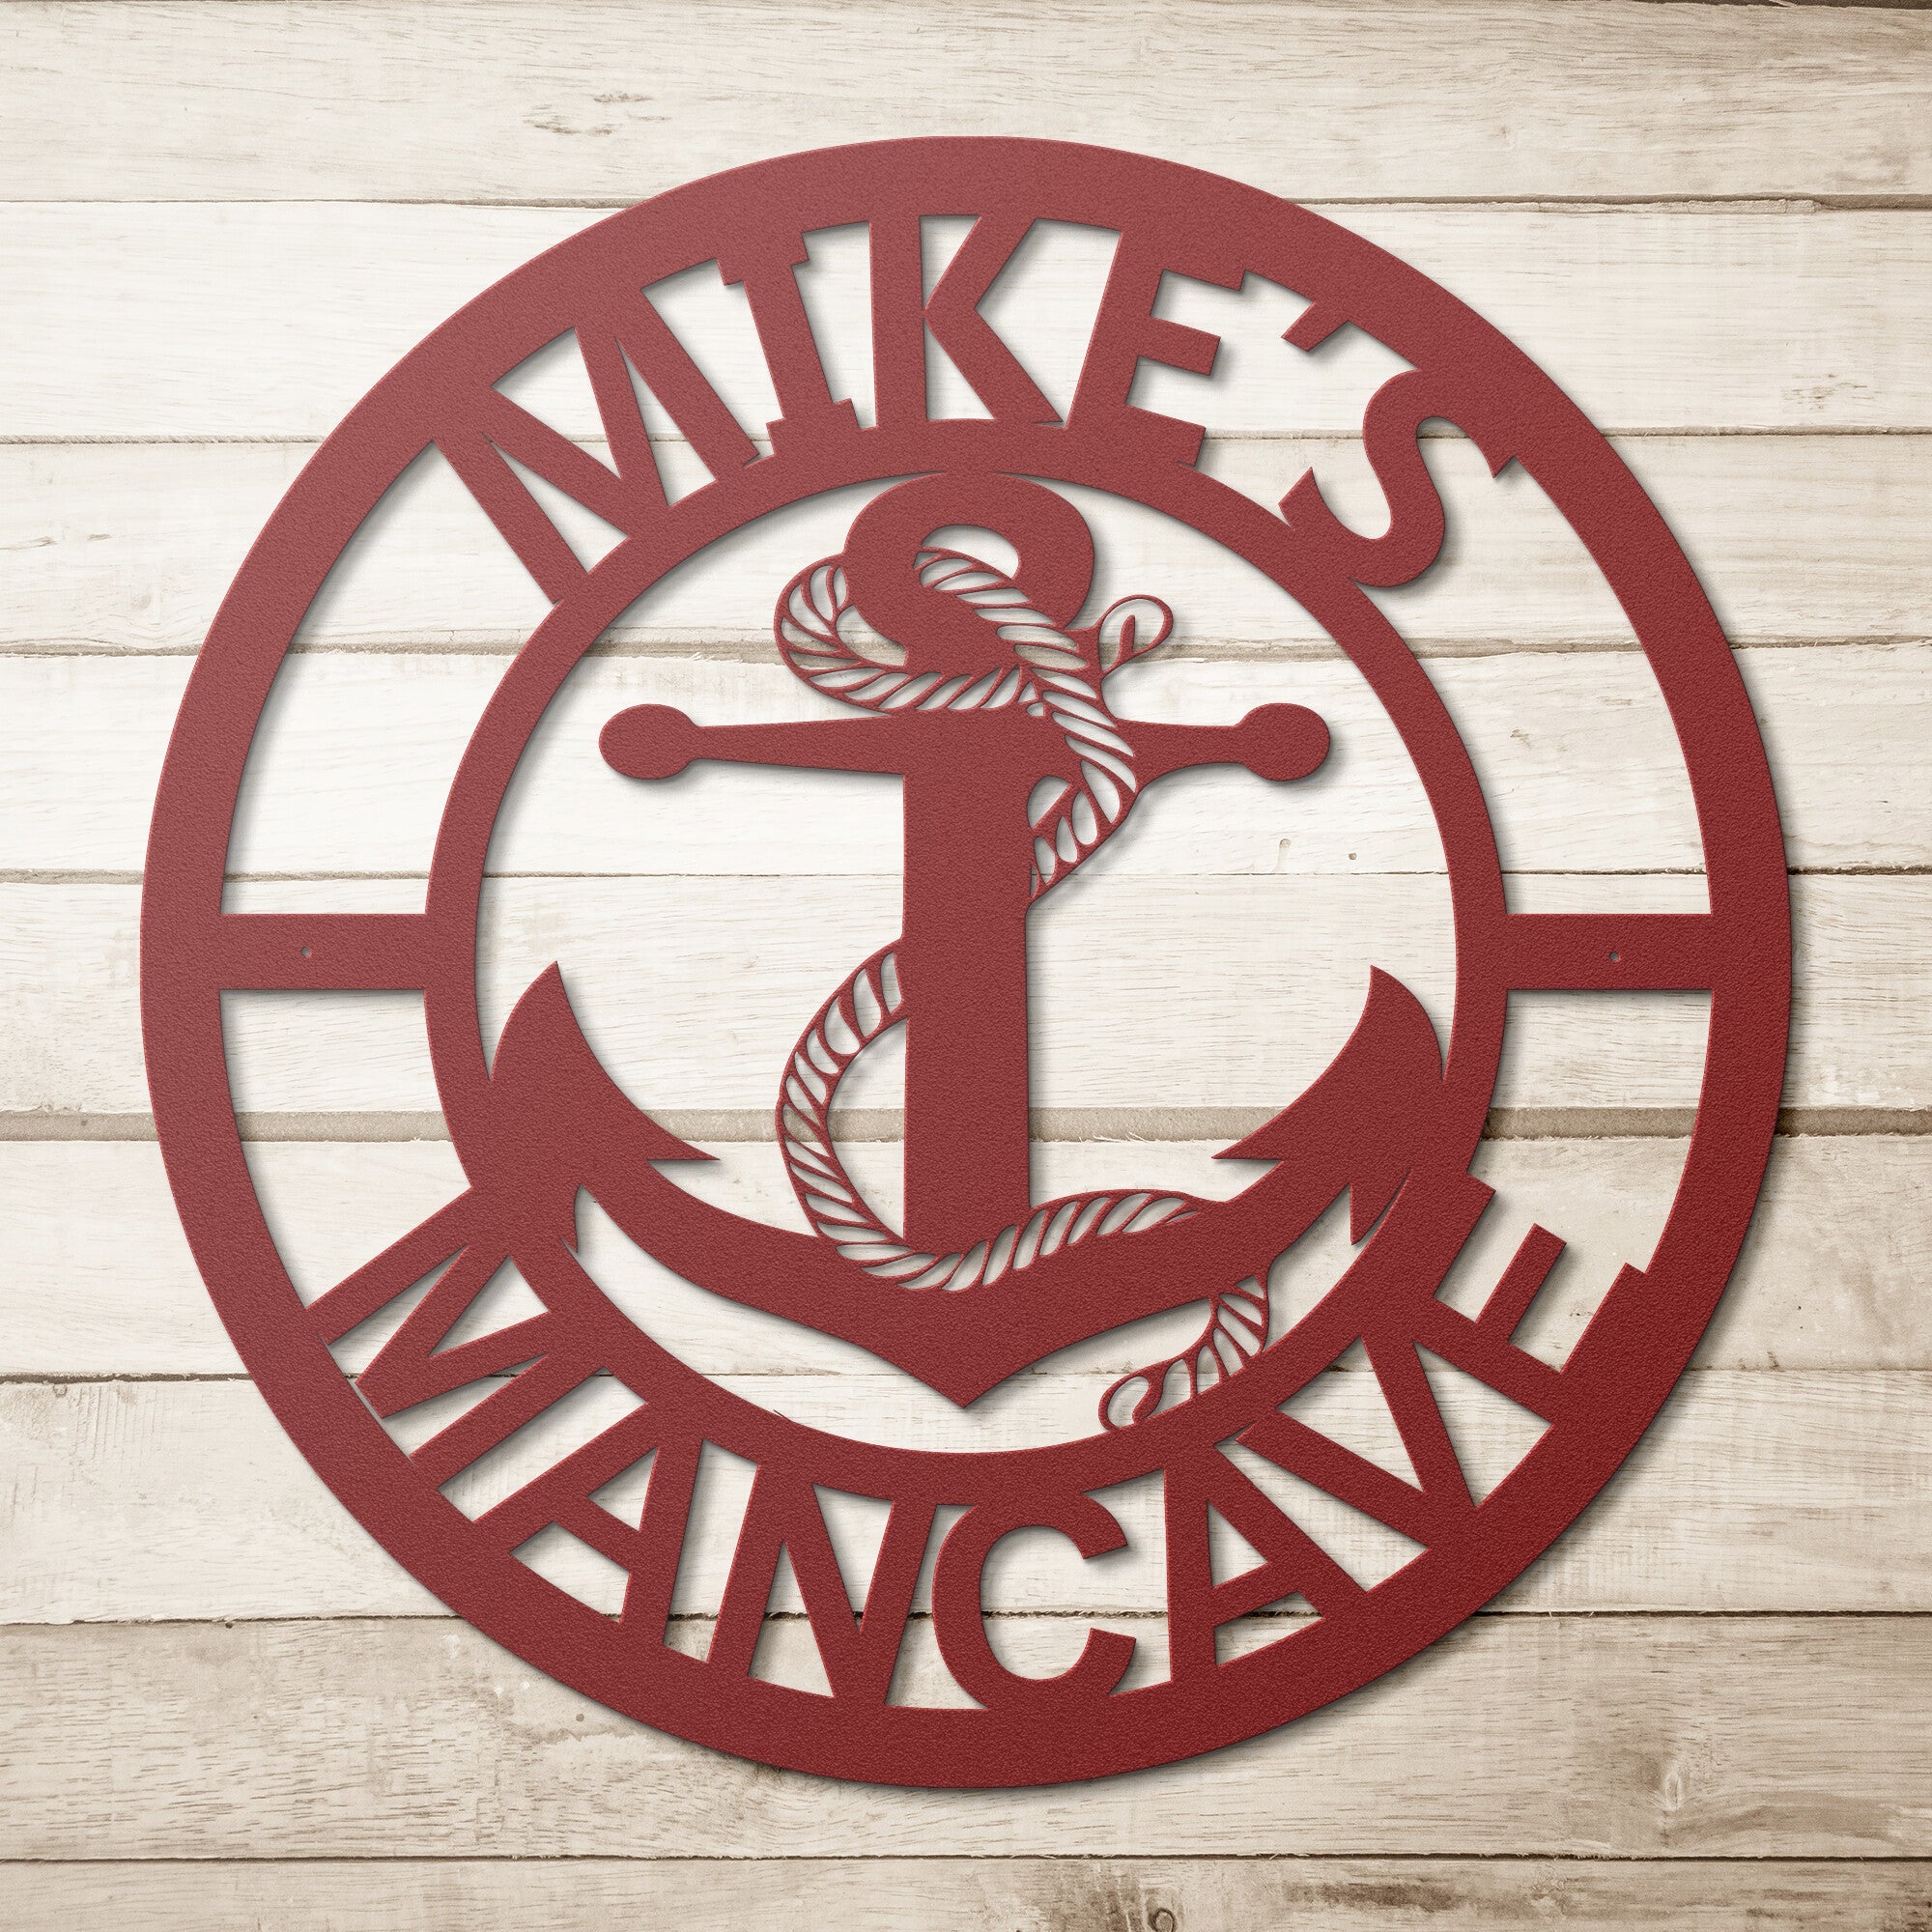 Personalized Nautical Sign - Cool Metal Signs